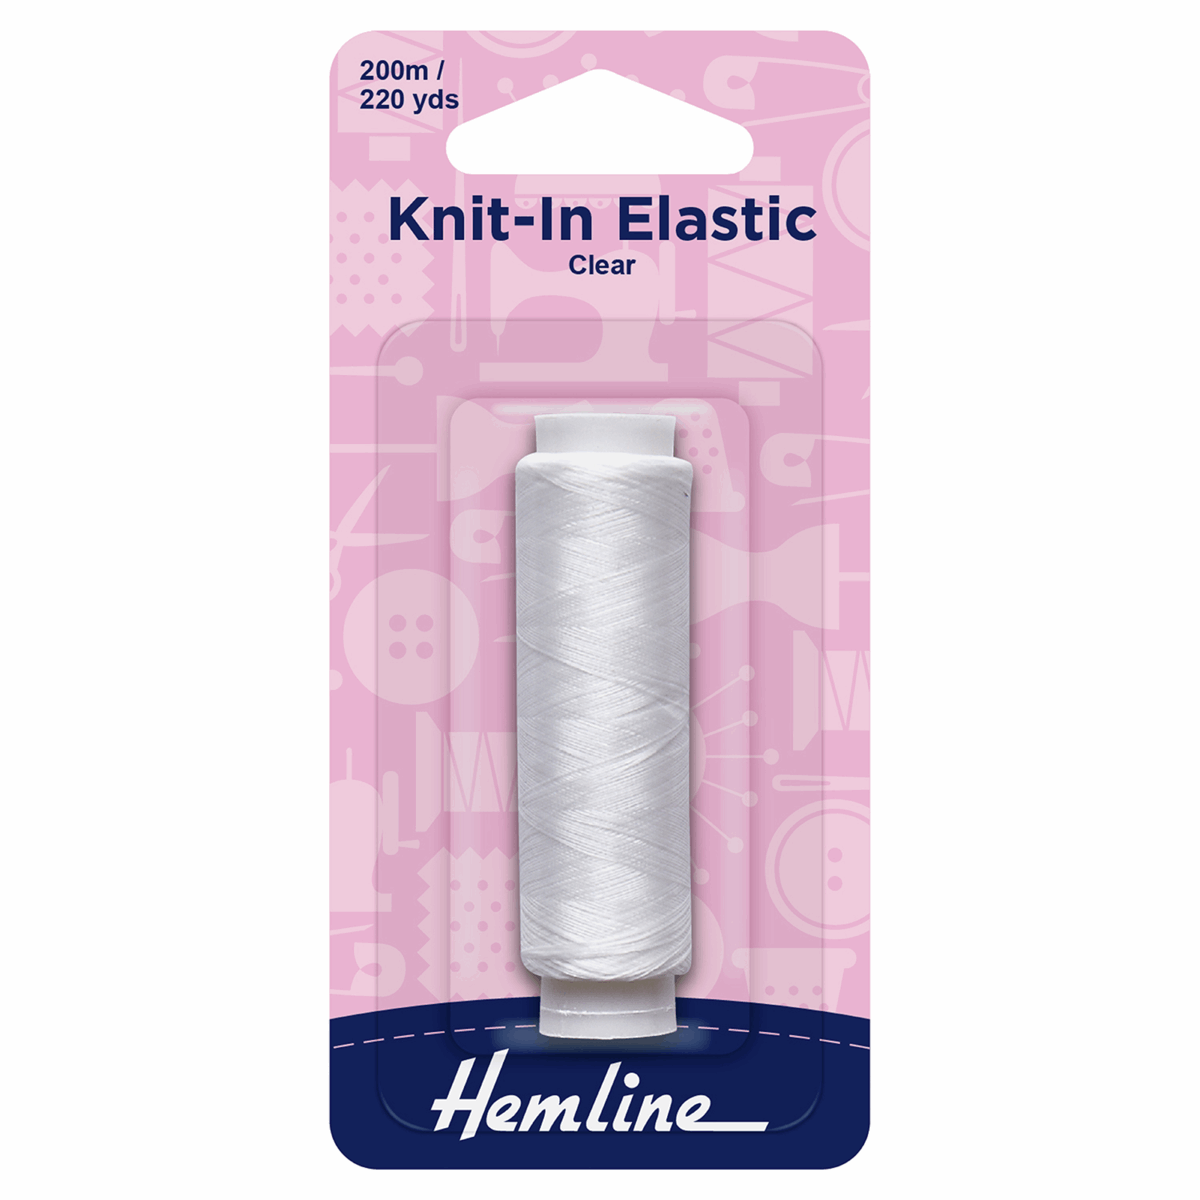 Knit-In Elastic - 200m/220yds